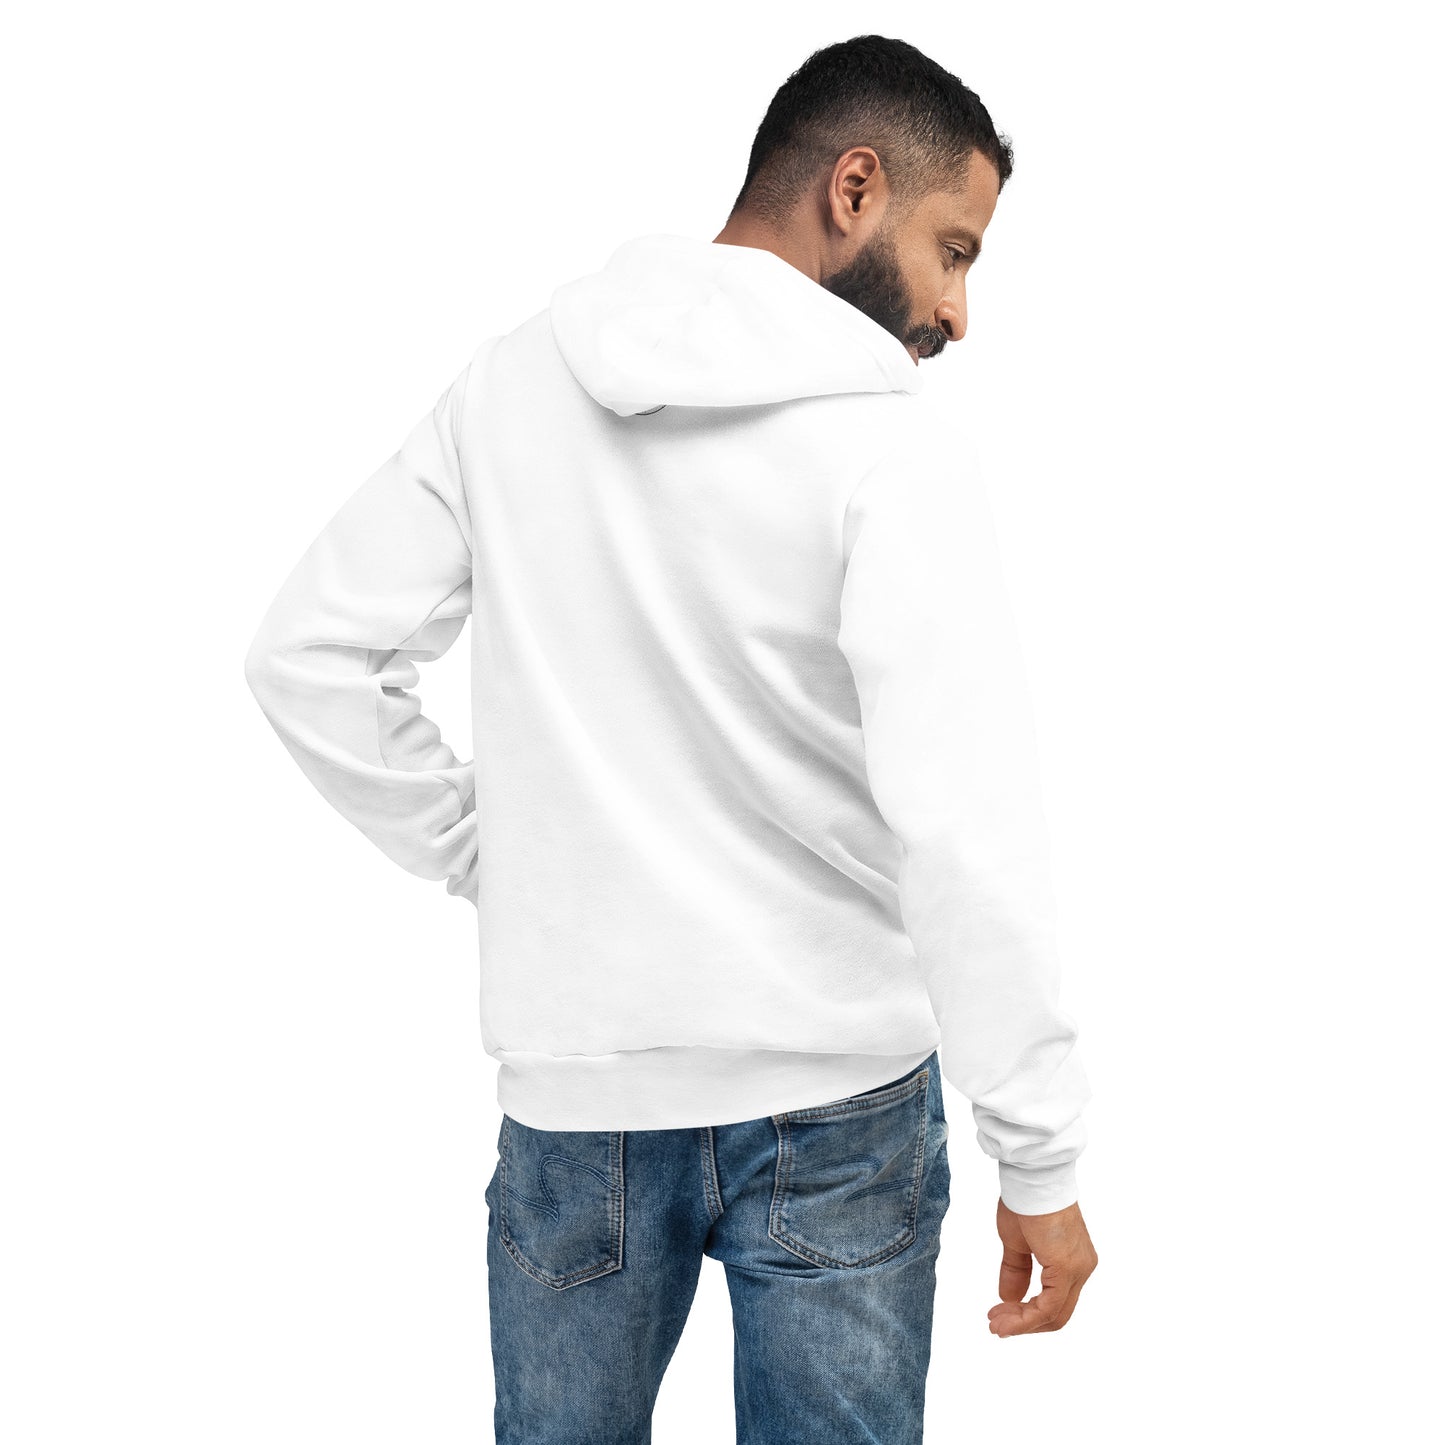 Adult Hoodie "TAVERNA RODOS" on Classic White